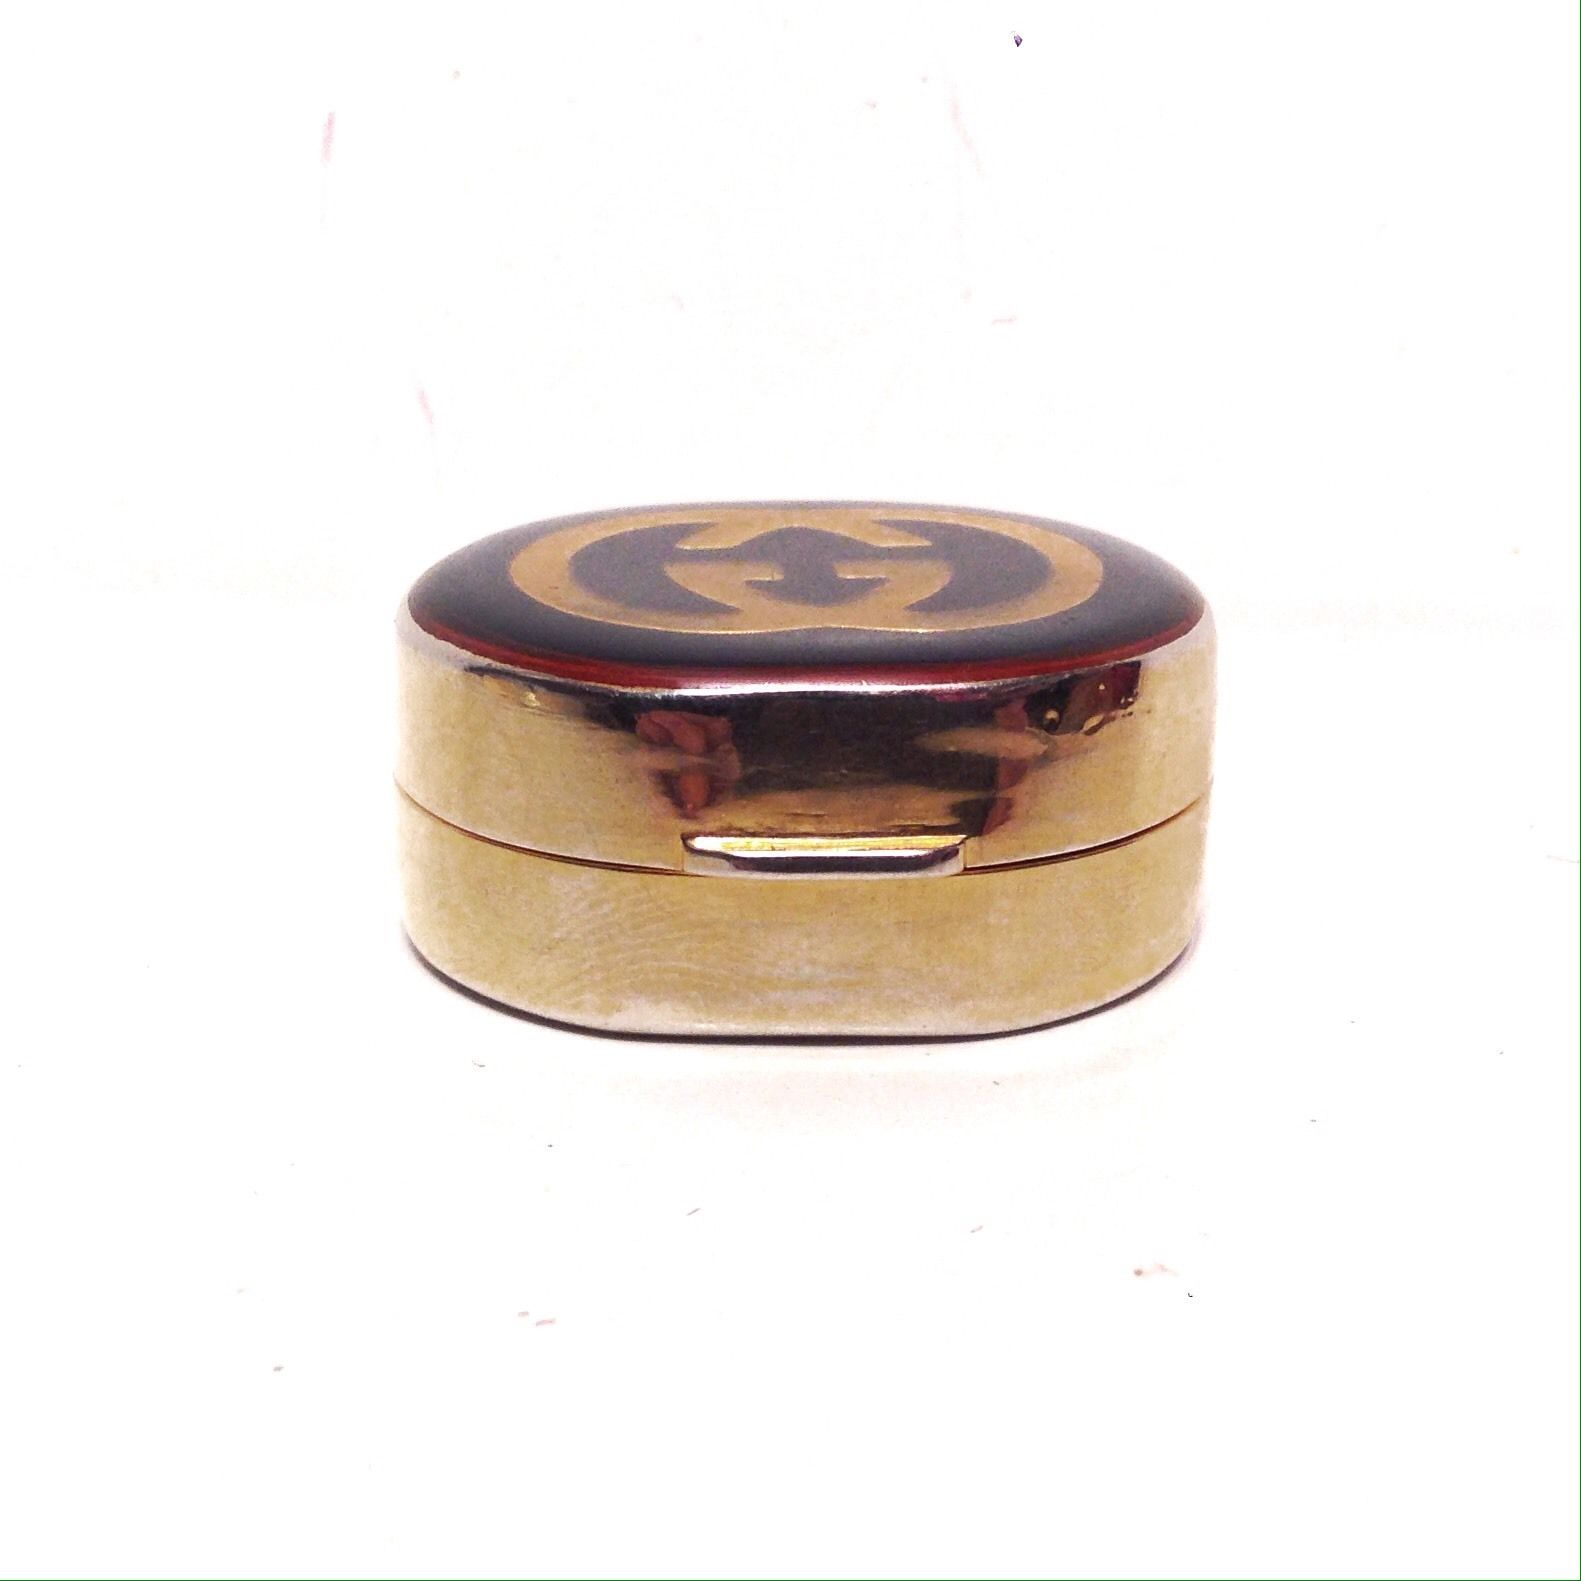 Gucci Pill Box Container Vintange 1970 Gold Plated